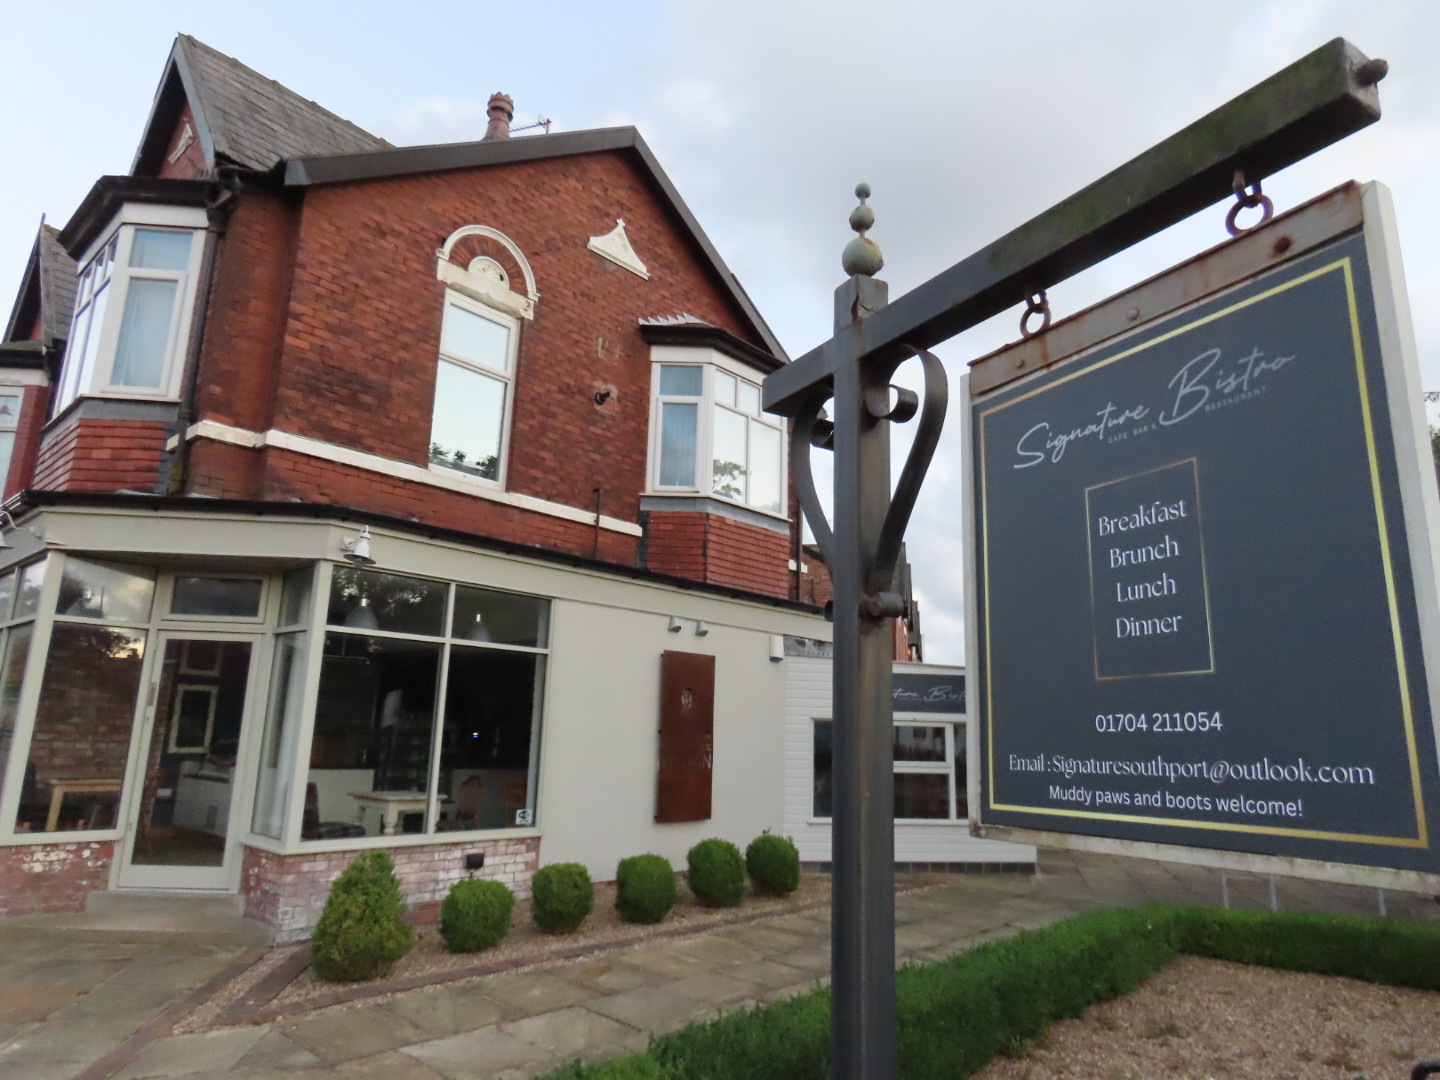 Signature Bistro in Churchtown in Southport